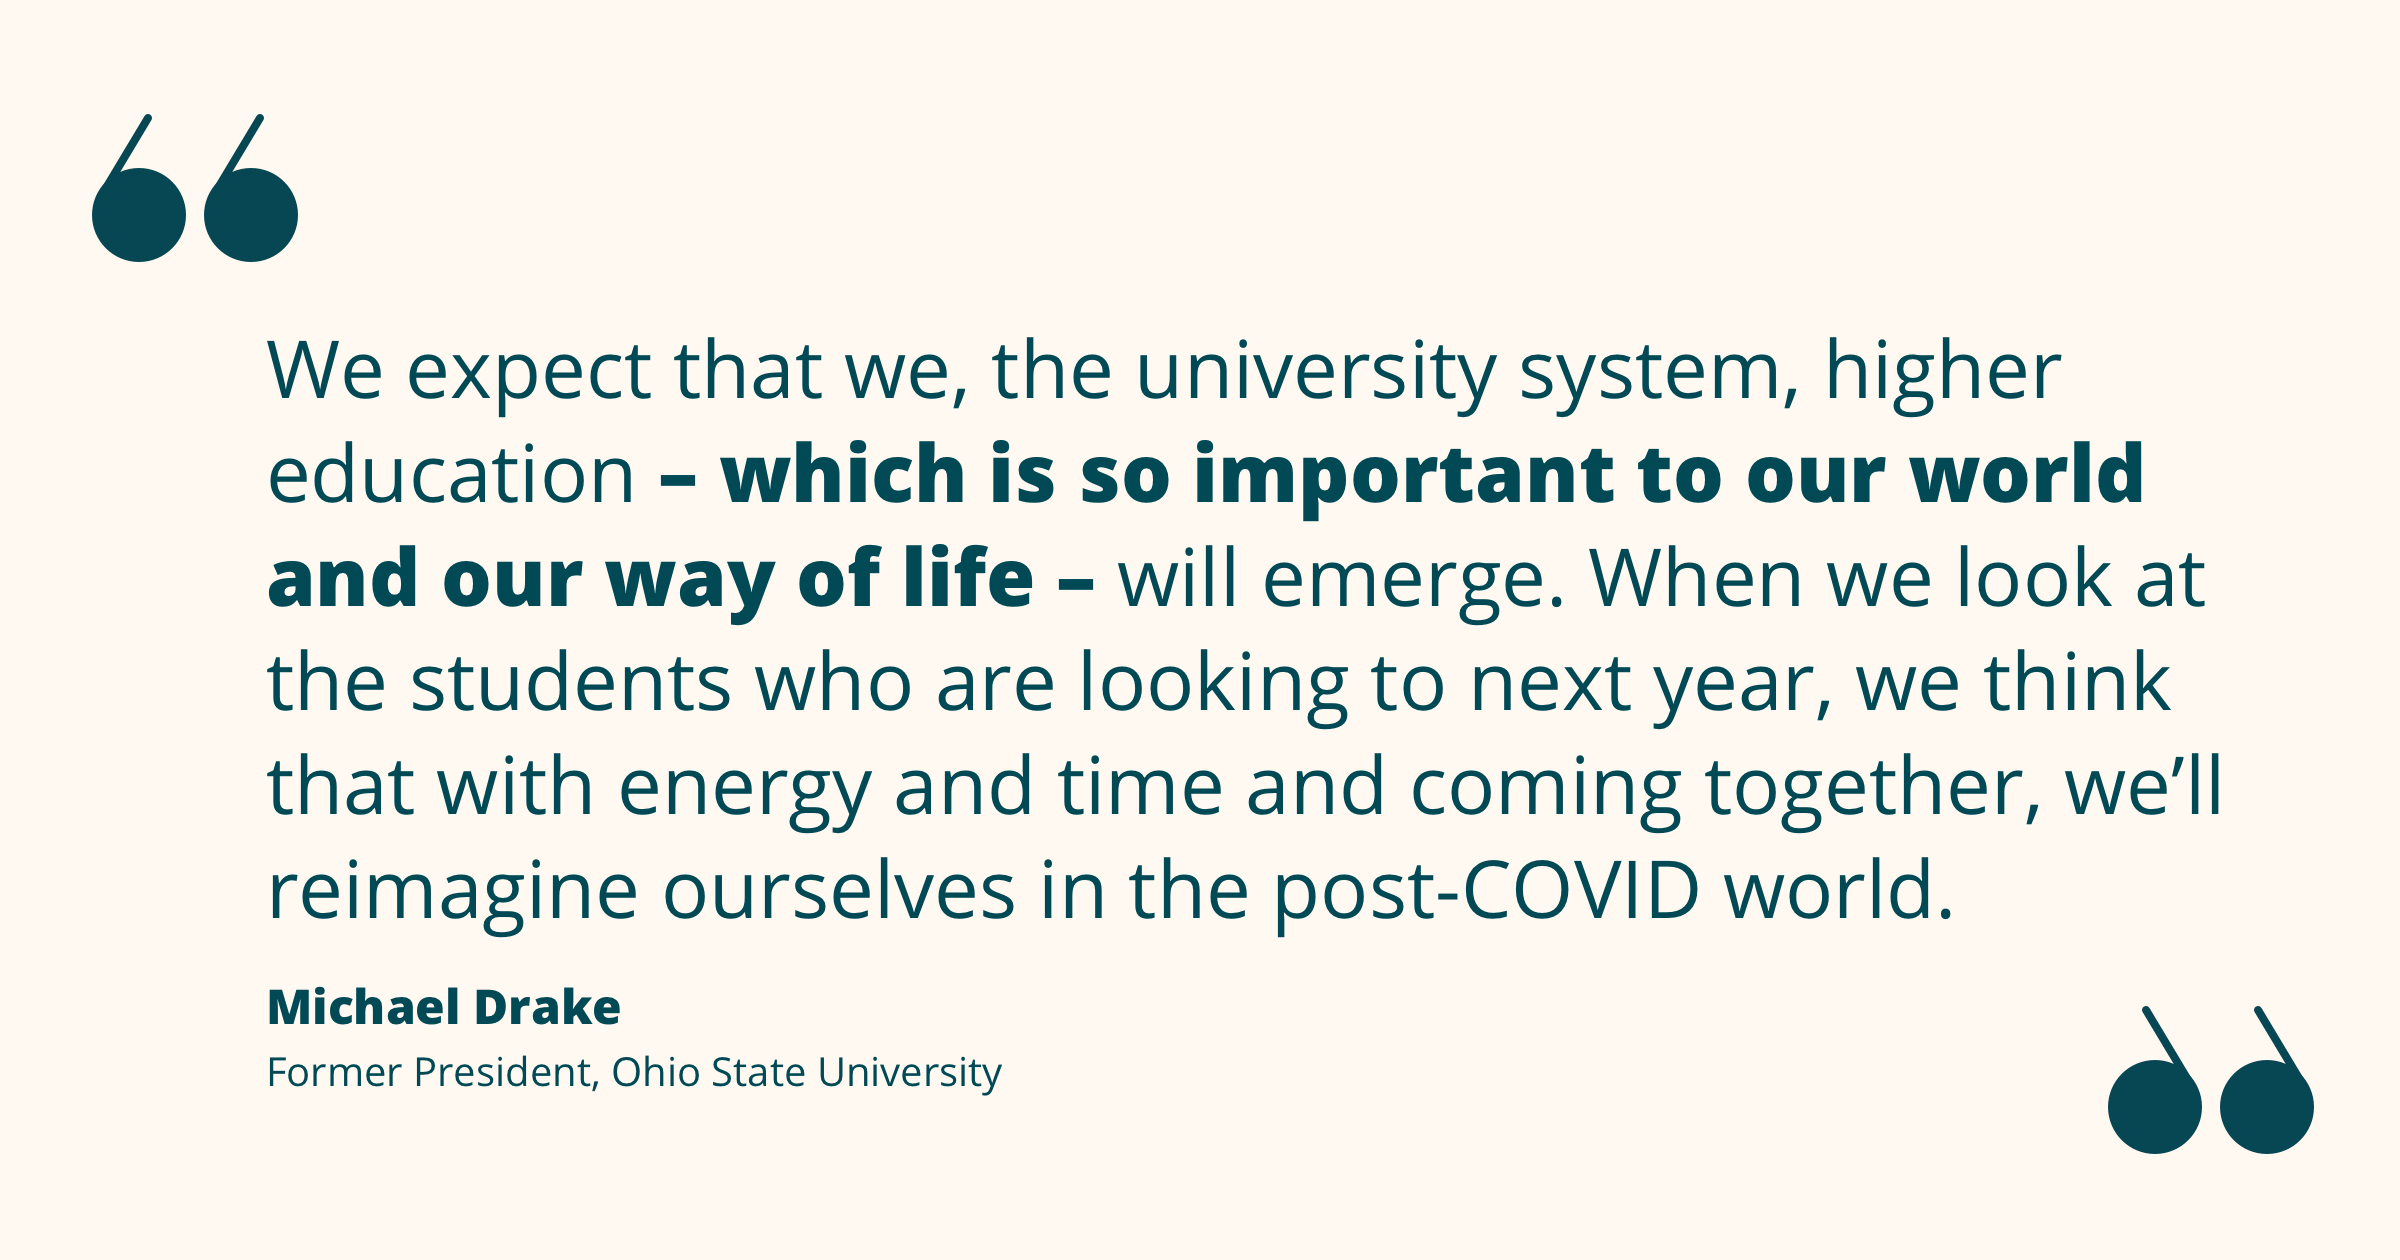 Quote from Michael Drake: "We expect that we, the university system, higher education – which is so important to our world and our way of life – will emerge. When we look at the students who are looking to next year, we think that with energy and time and coming together, we’ll reimagine ourselves in the post-COVID world."